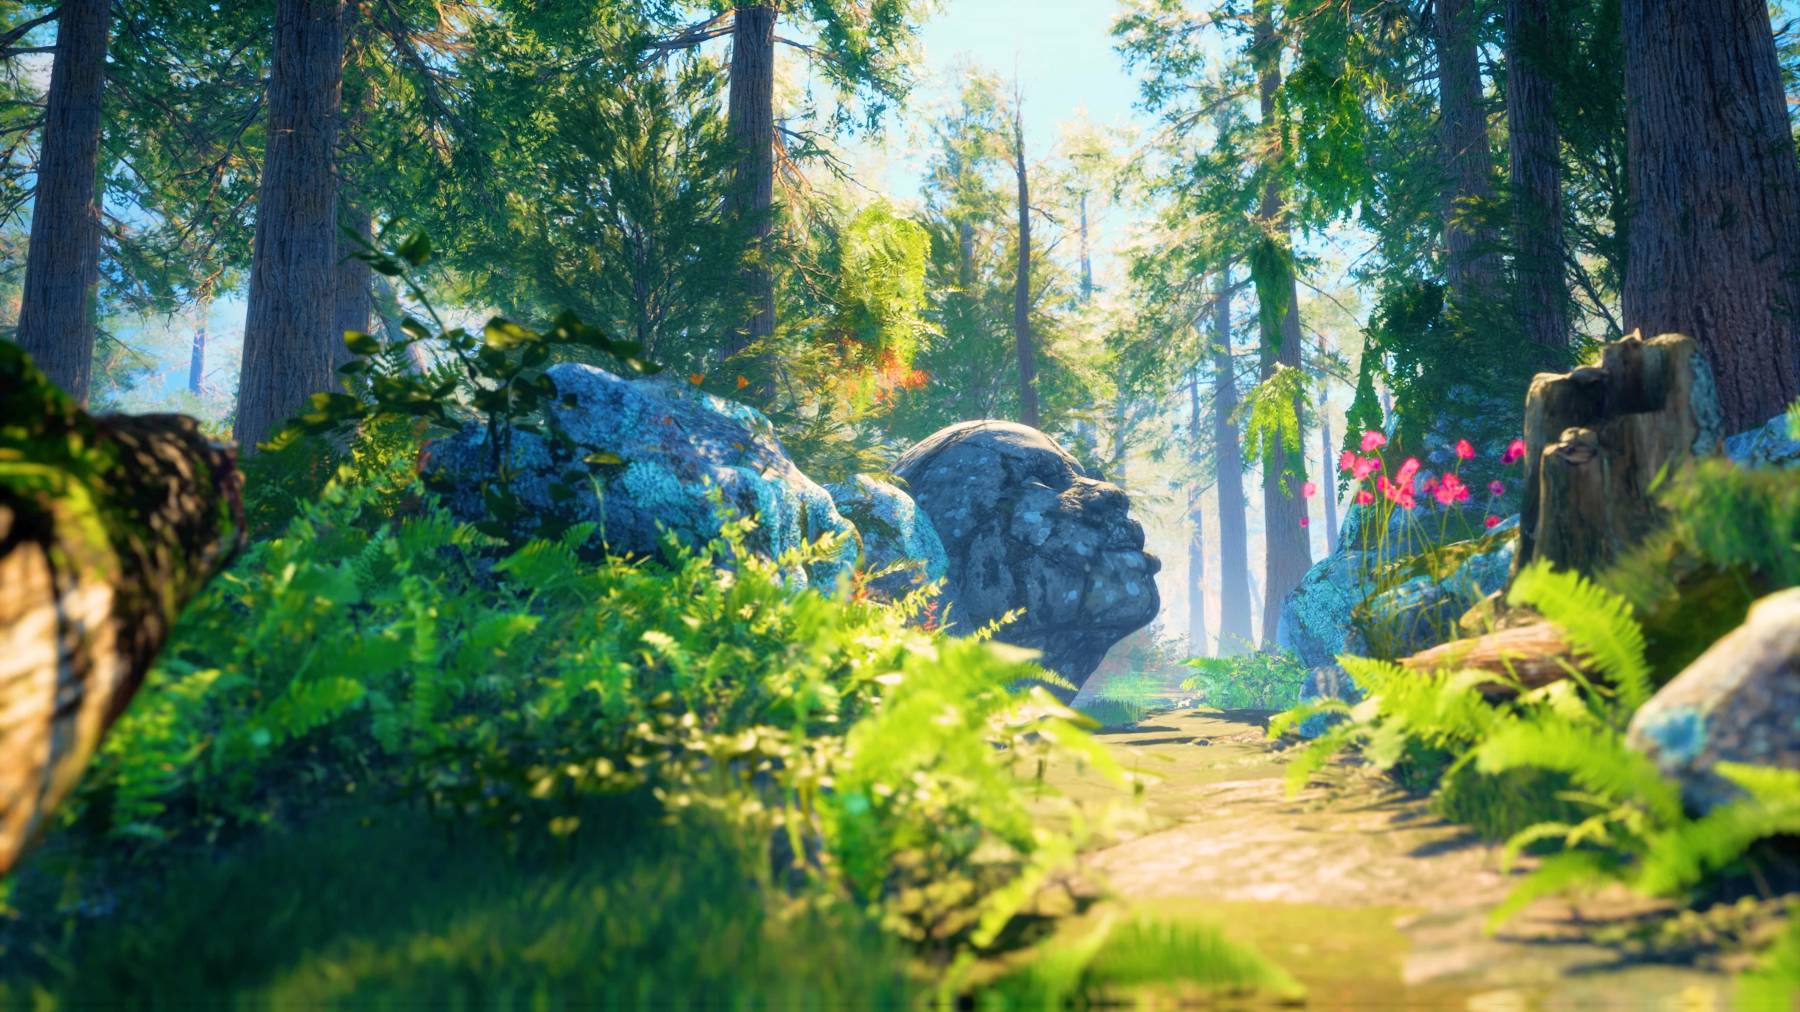 A path runs through a virtual forest and past a large stone head that gazes up toward the treetops.